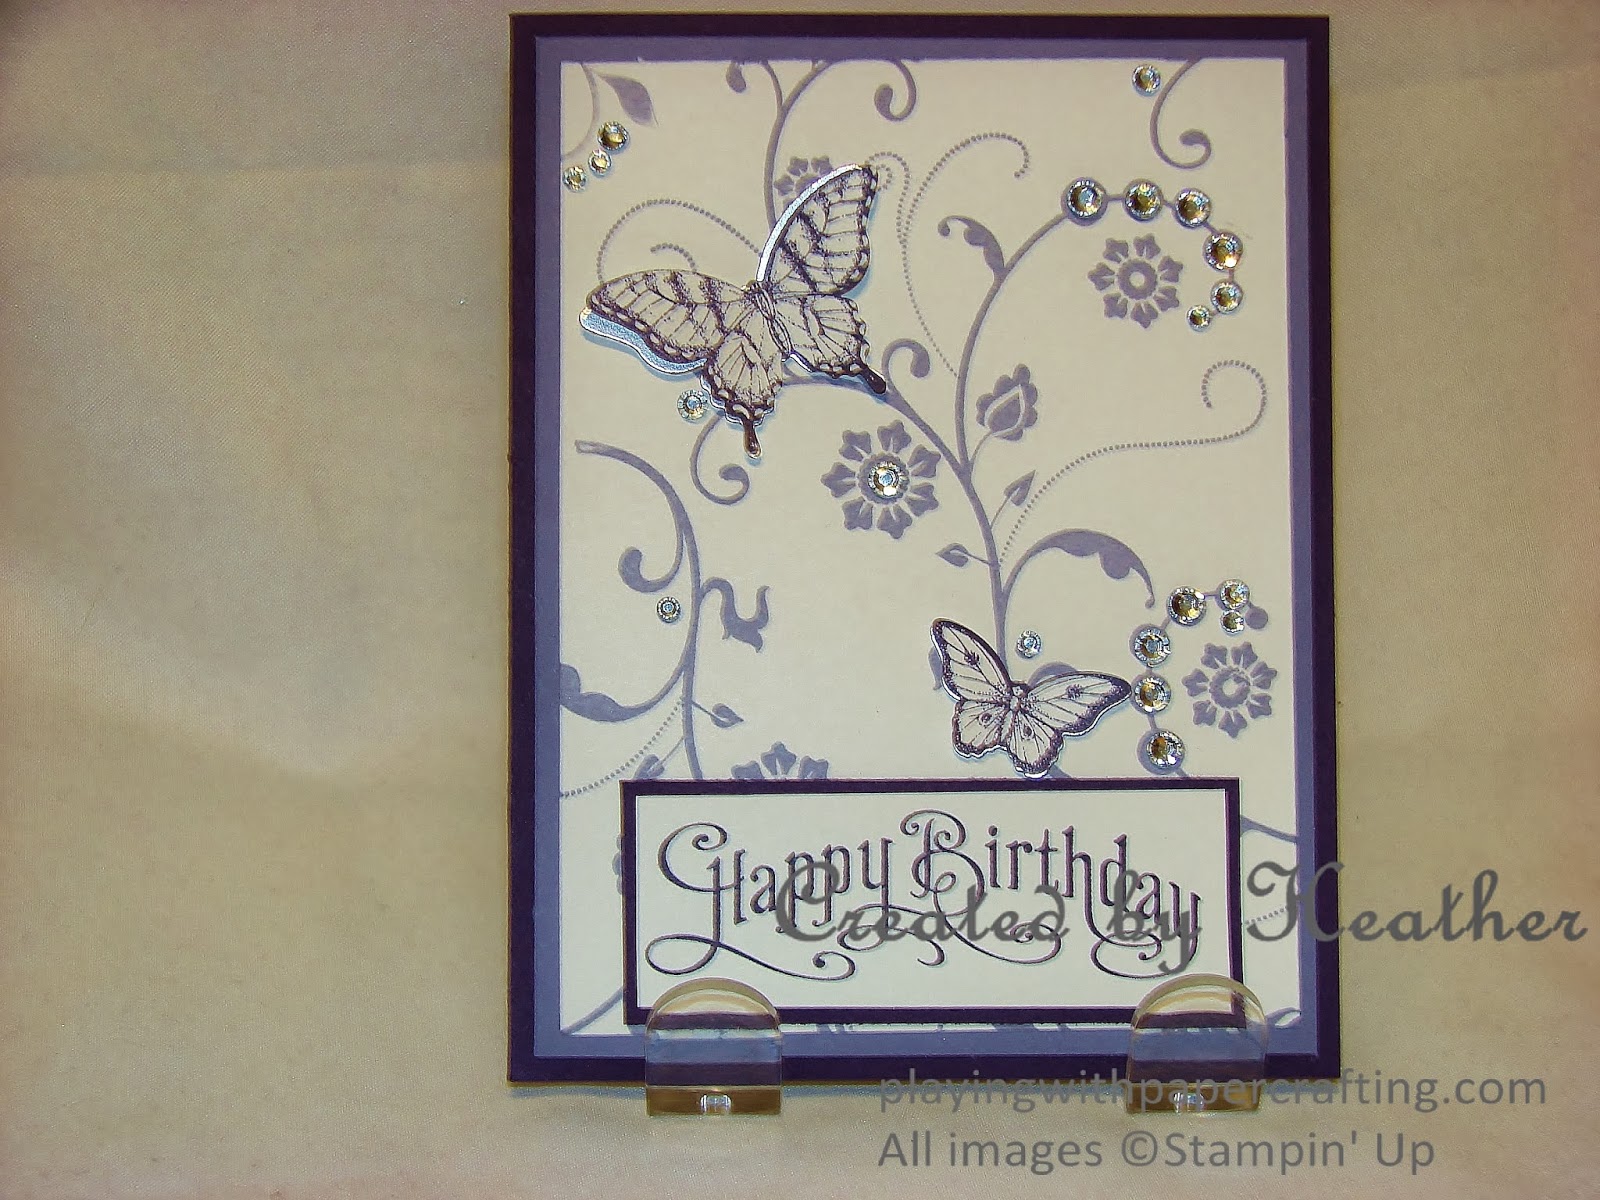 Playing with Papercrafting: Elegant Birthday